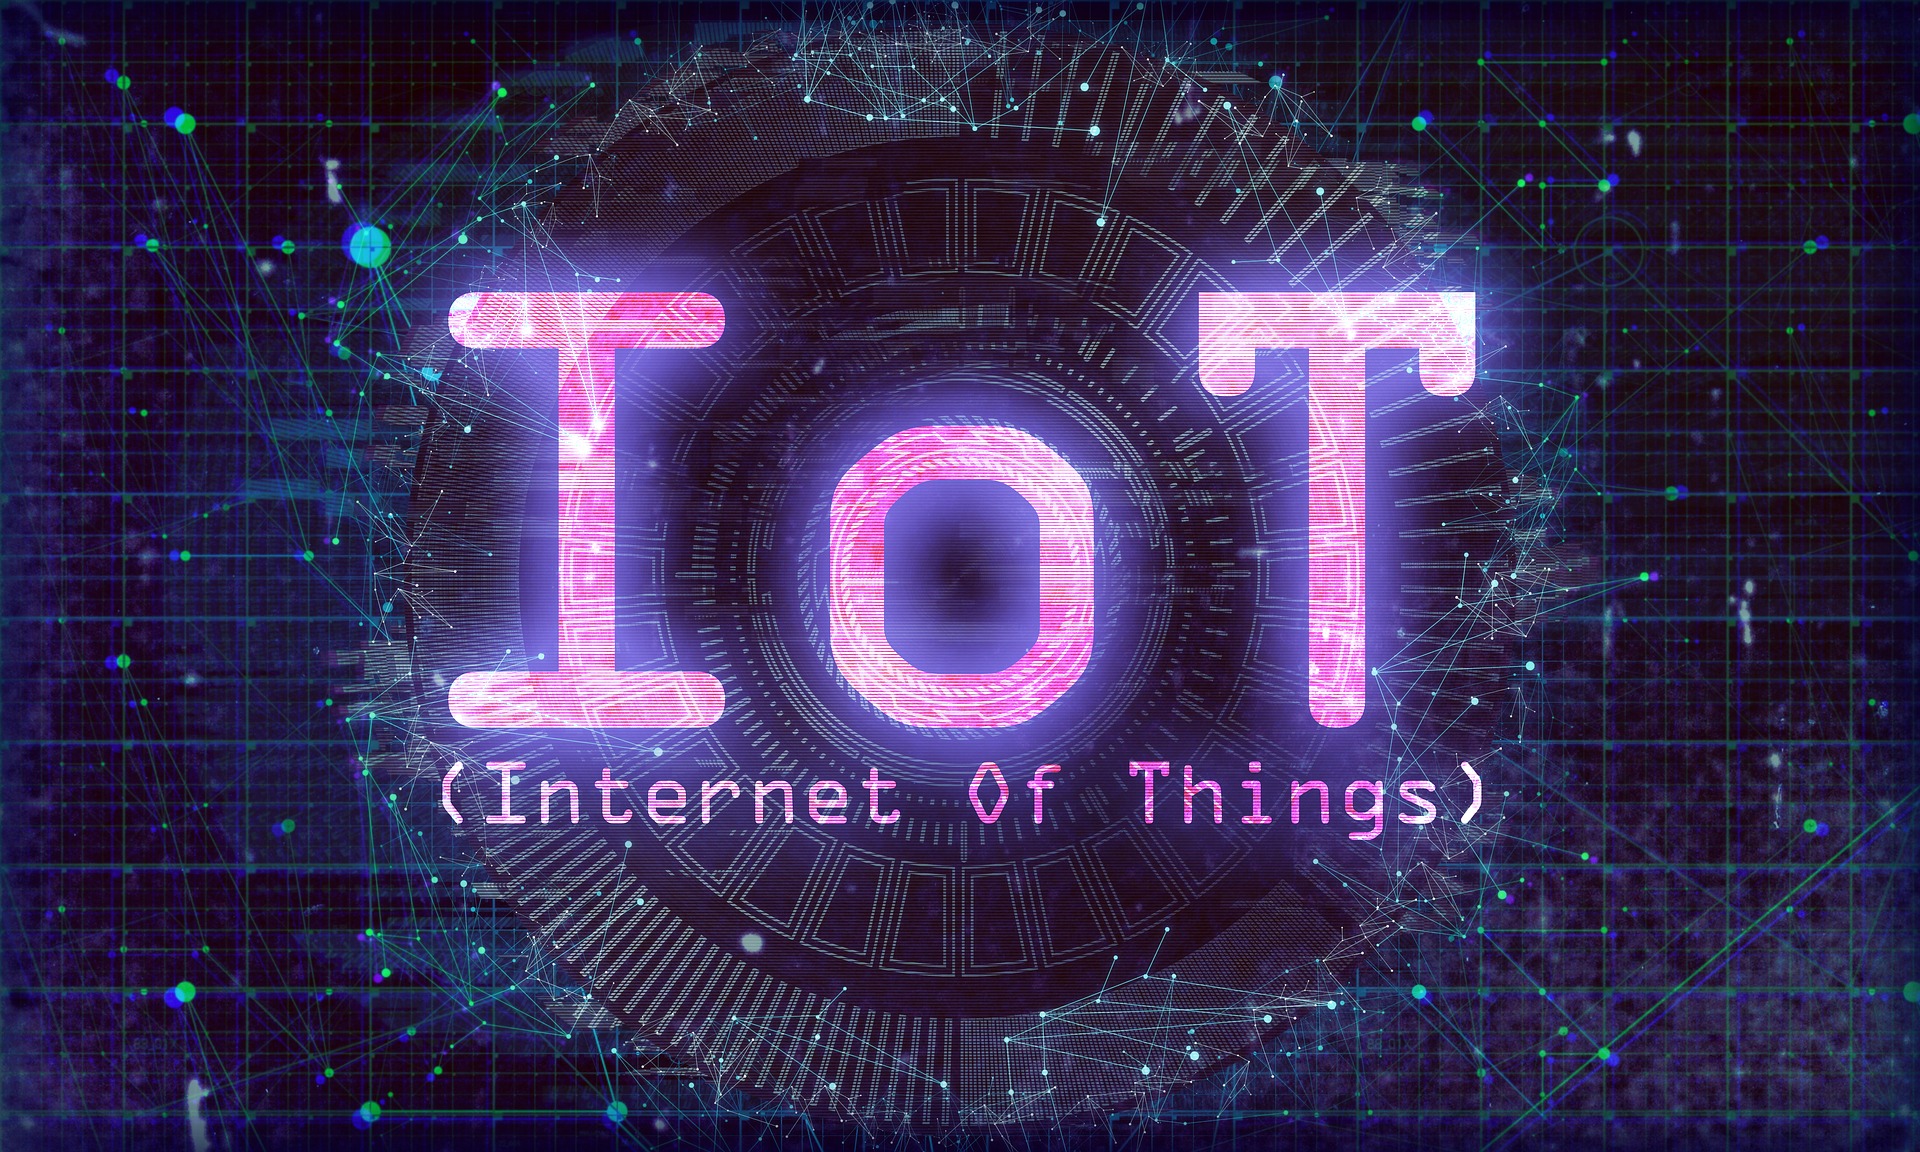 3 Ways the Internet of Things Has Impacted Business